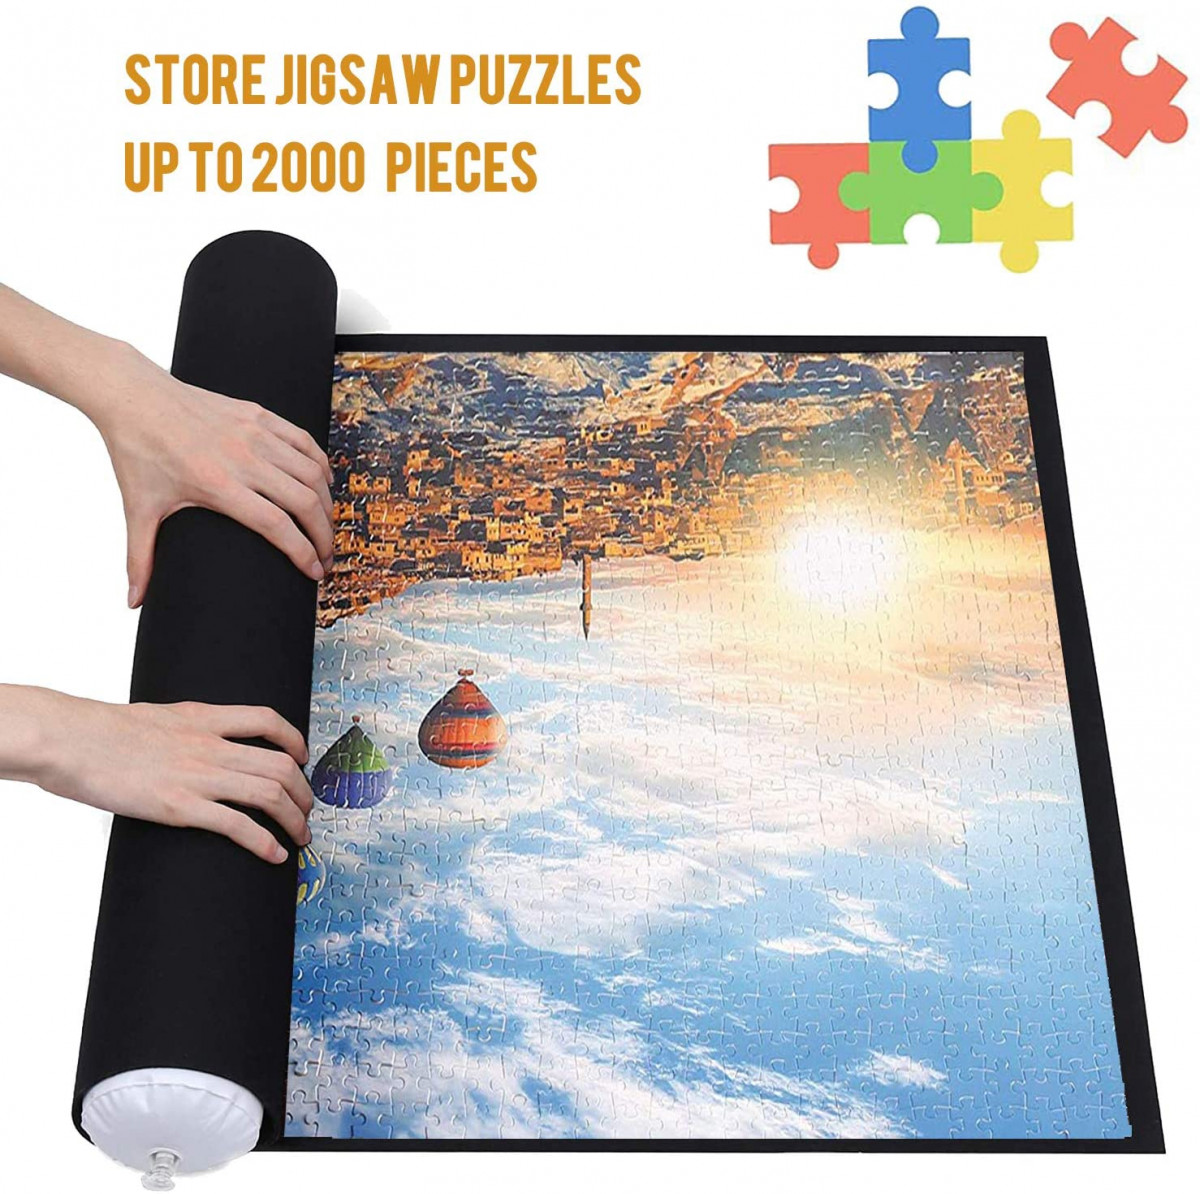 Can You Use A Yoga Mat For A Puzzle